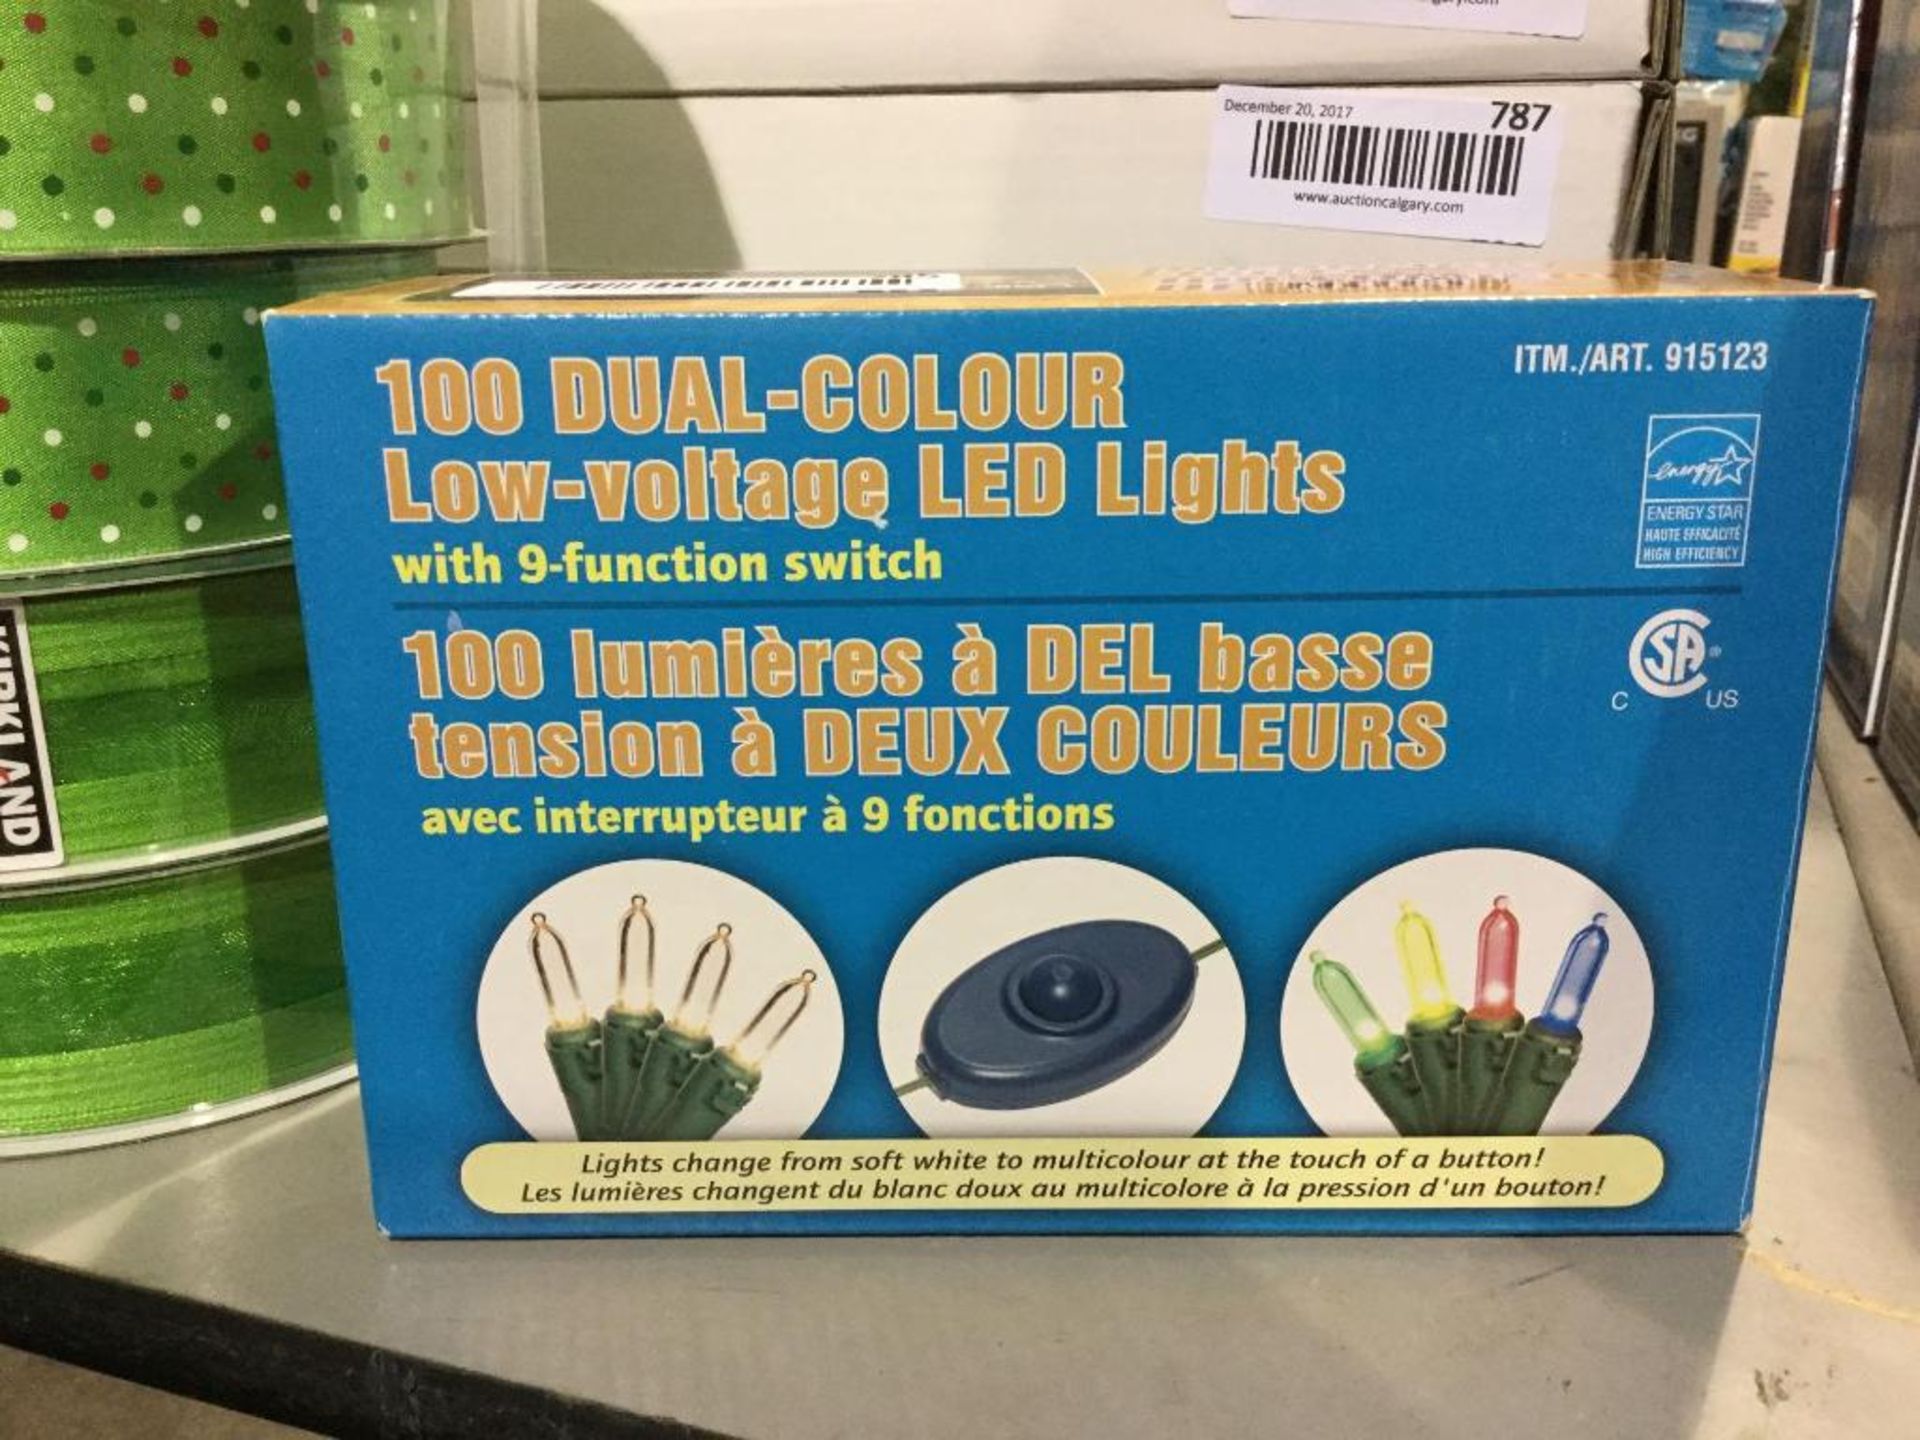 box of 100 Dual-colour Low-Voltage LED Lights with 9-function switch